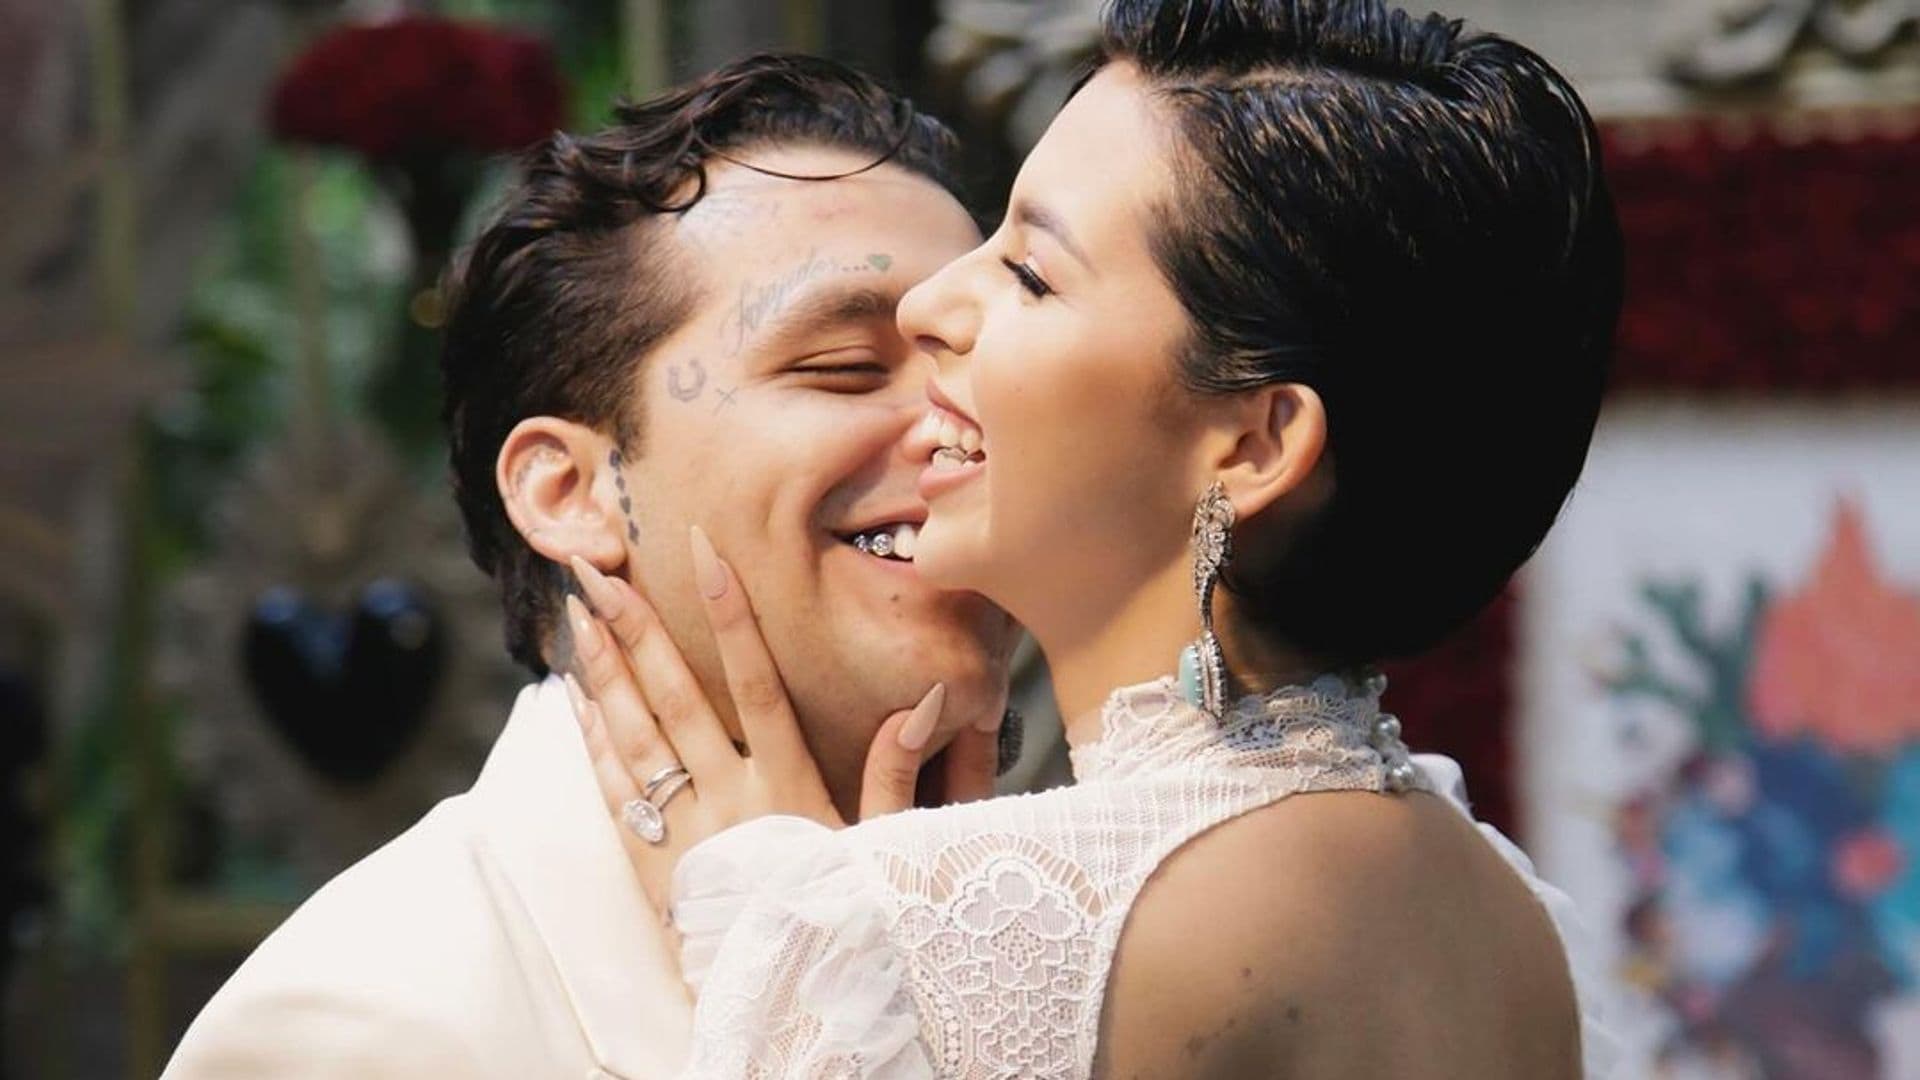 Angela Aguilar pours her heart out in a letter to Christian Nodal to celebrate their wedding day